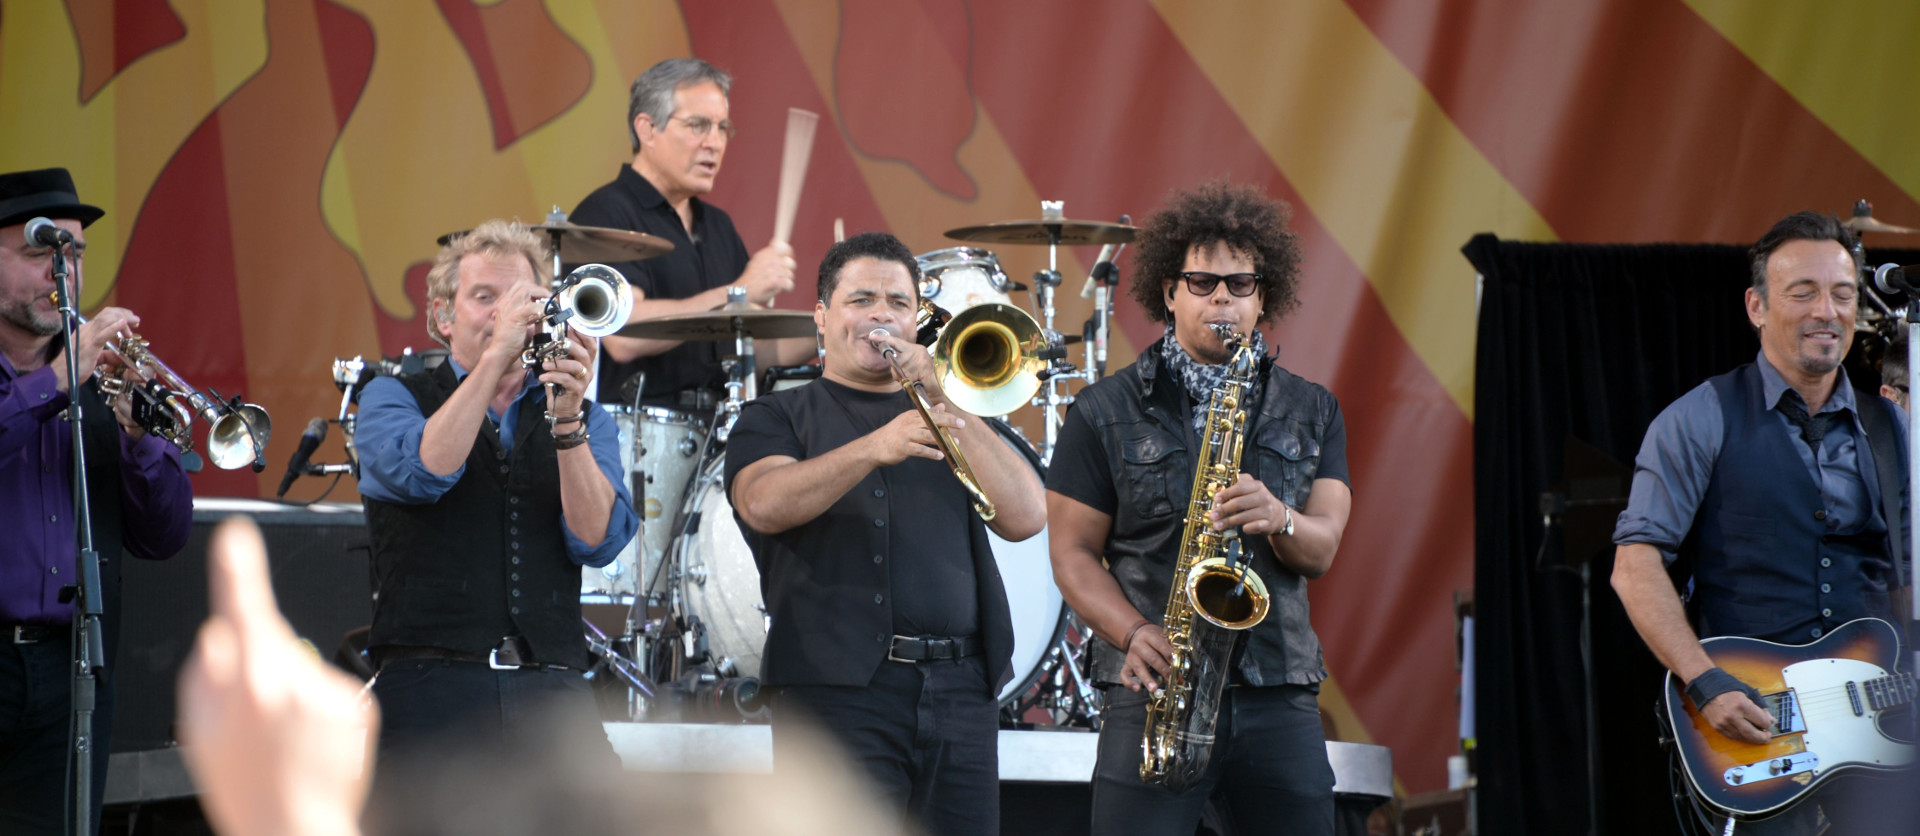 Max Weinberg on drums, fronted by the E Street horns, and Bruce